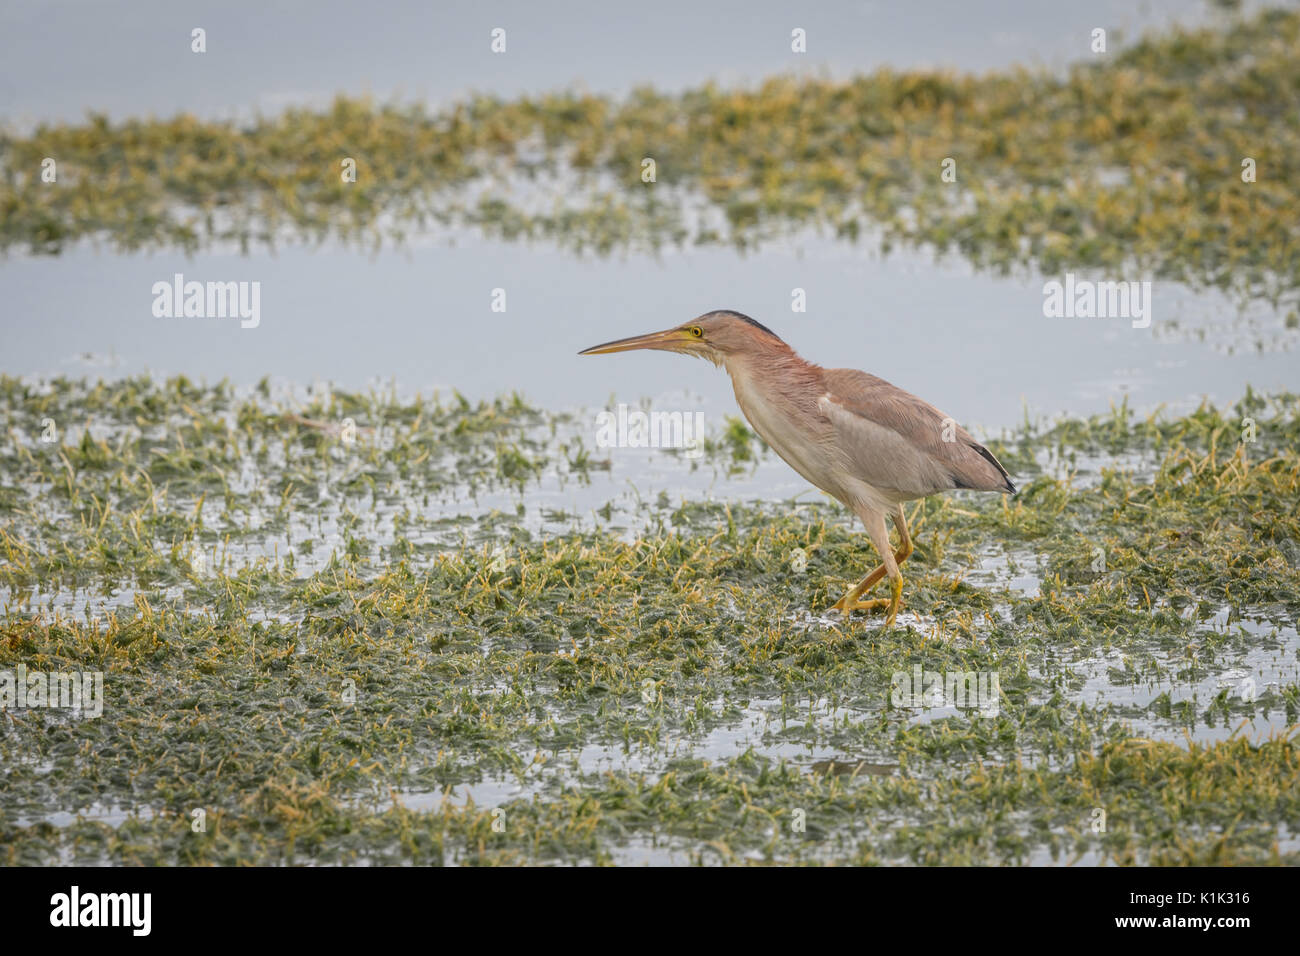 Yellow bittern (Ixobrychus sinensis) in Khao Sam Roi Yot National Park, Thailand. Bitterns are a classification of birds in the heron family of Pelica Stock Photo